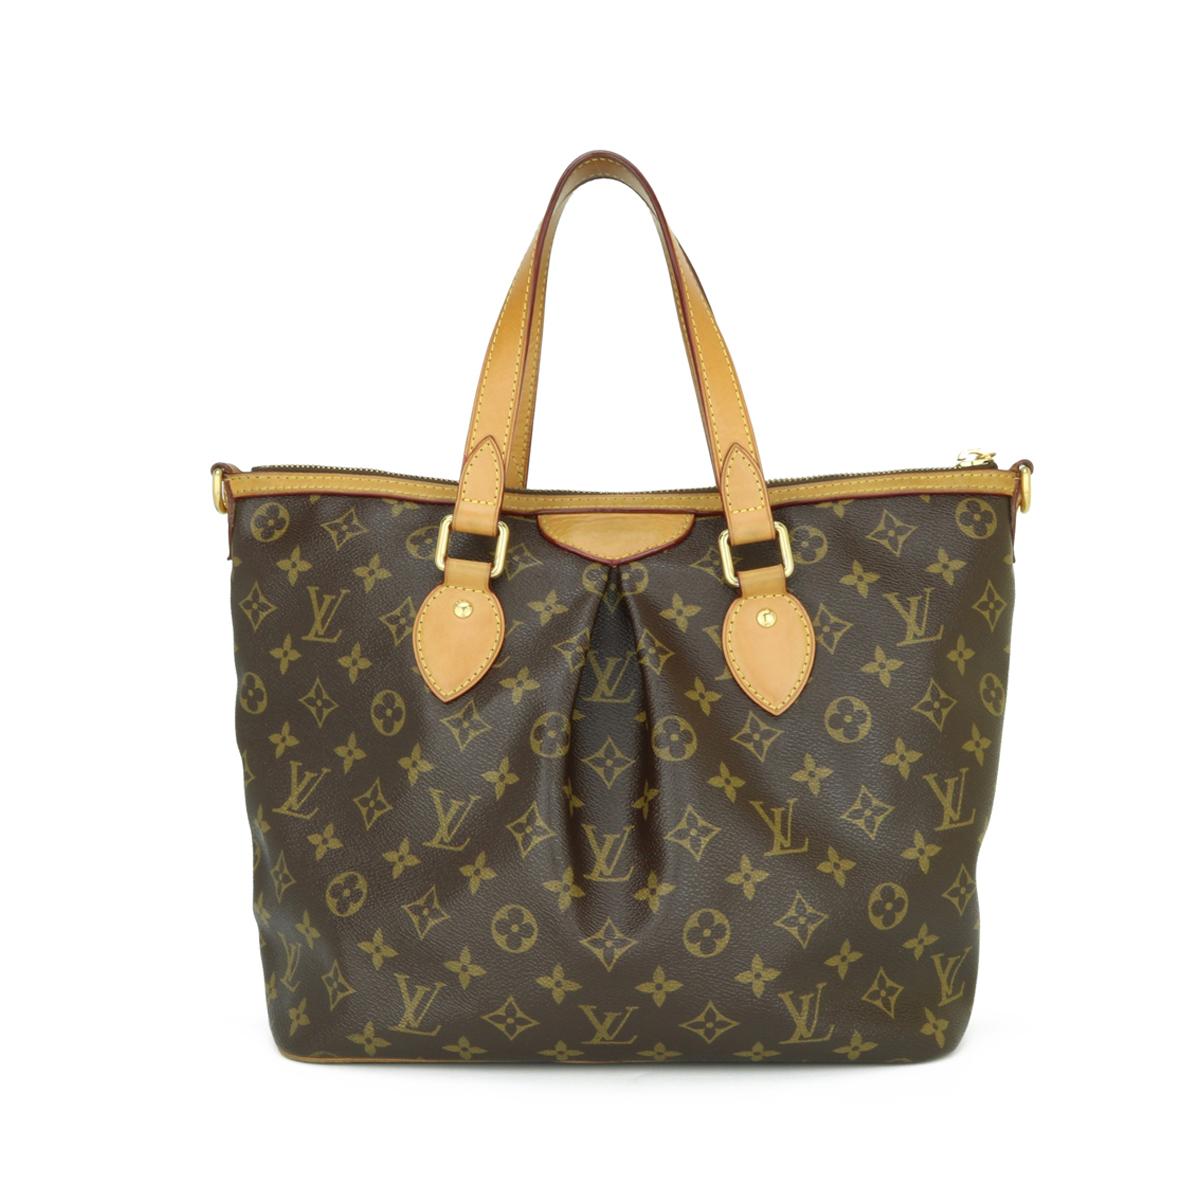 Louis Vuitton Palermo PM Bag in Monogram 2012.

This bag is in good condition. 

- Exterior Condition: Good condition. Light storage creasing to the canvas. The outside of the bag shows signs of wear - leather surface rubbing to four base corners.